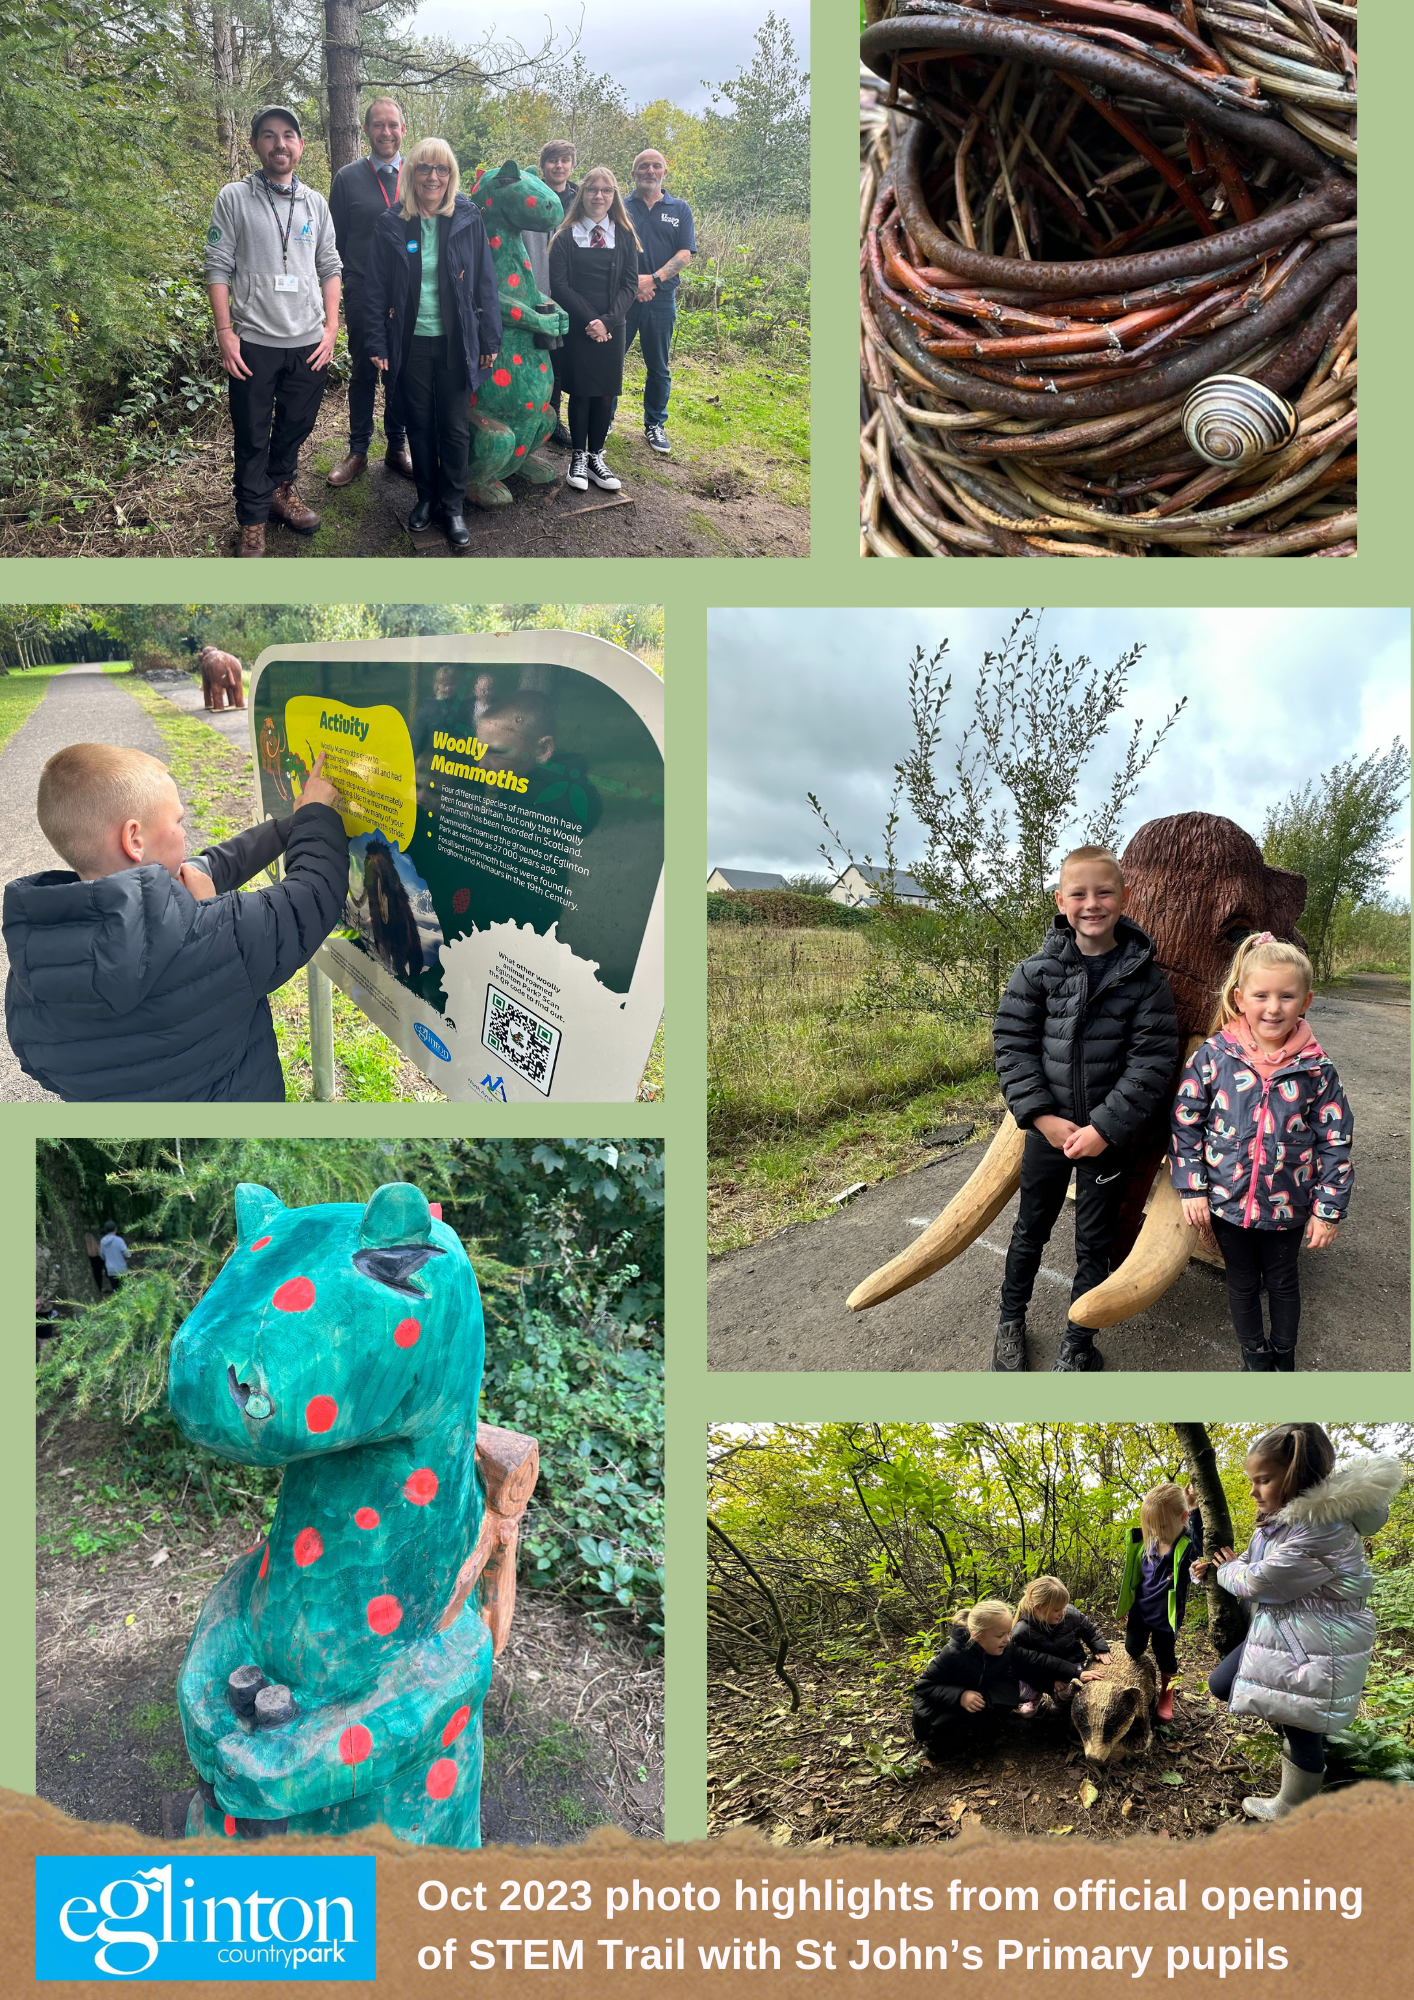 Photo highlights from official opening of STEM trail at Eglinton Country Park